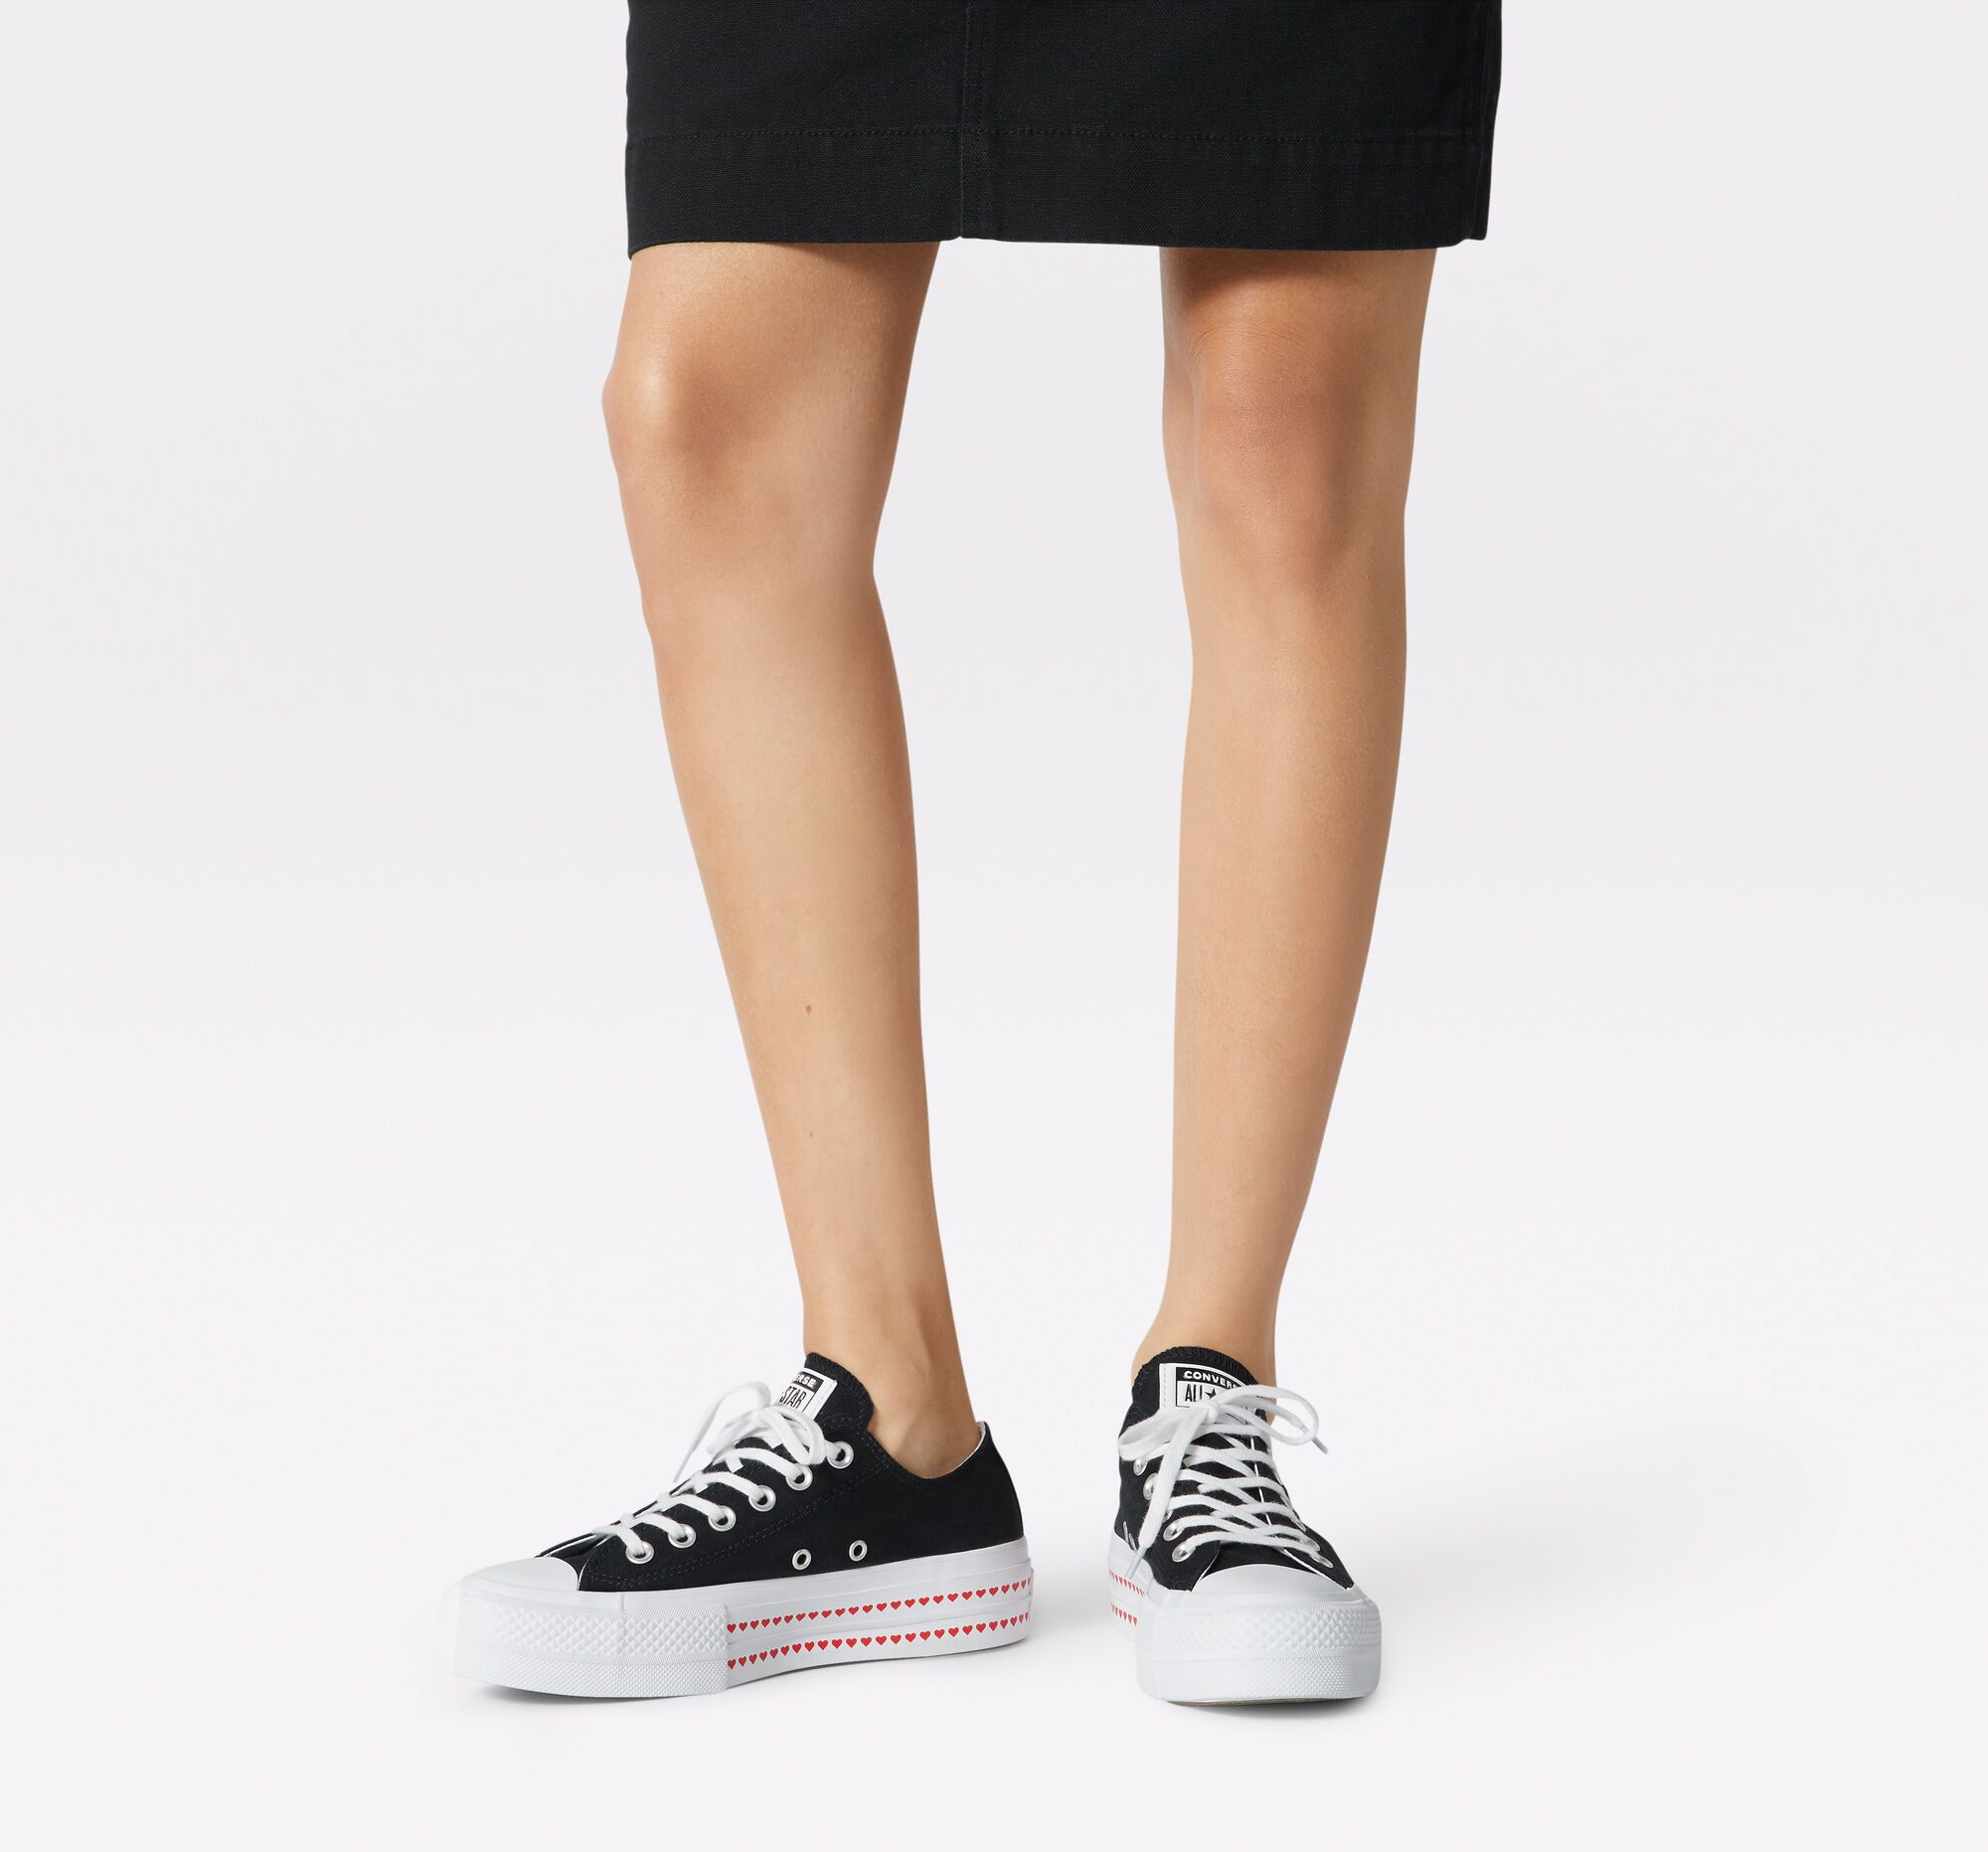 converse chuck taylor all star lift women's sneakers